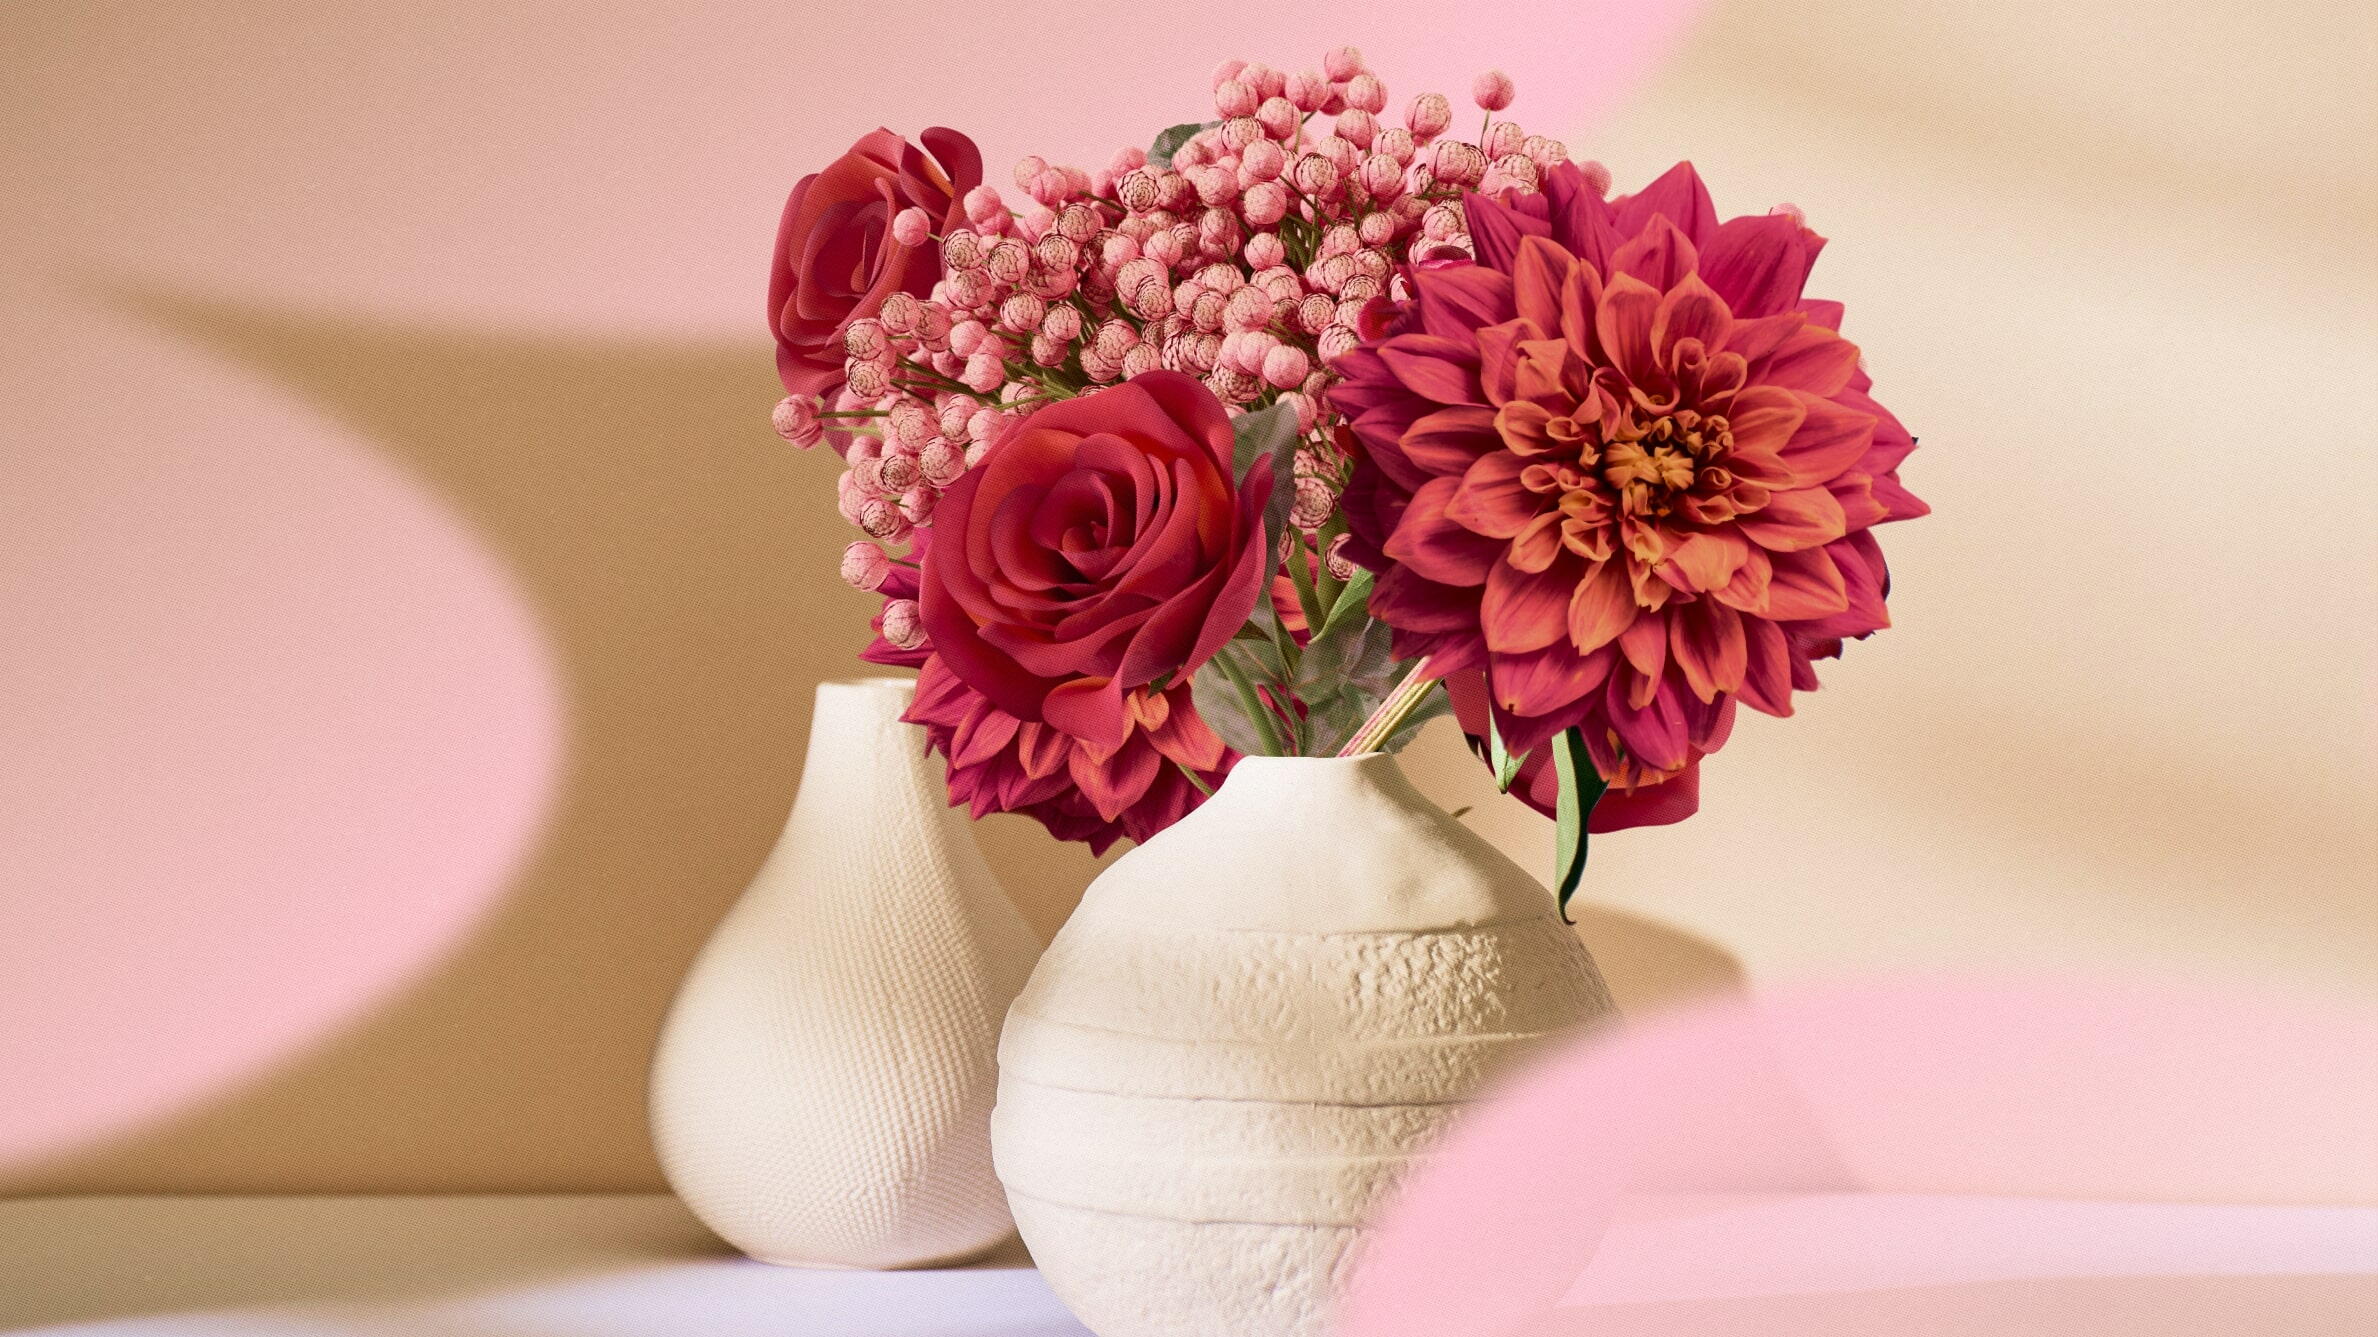 What Flowers Go Well with Dahlias